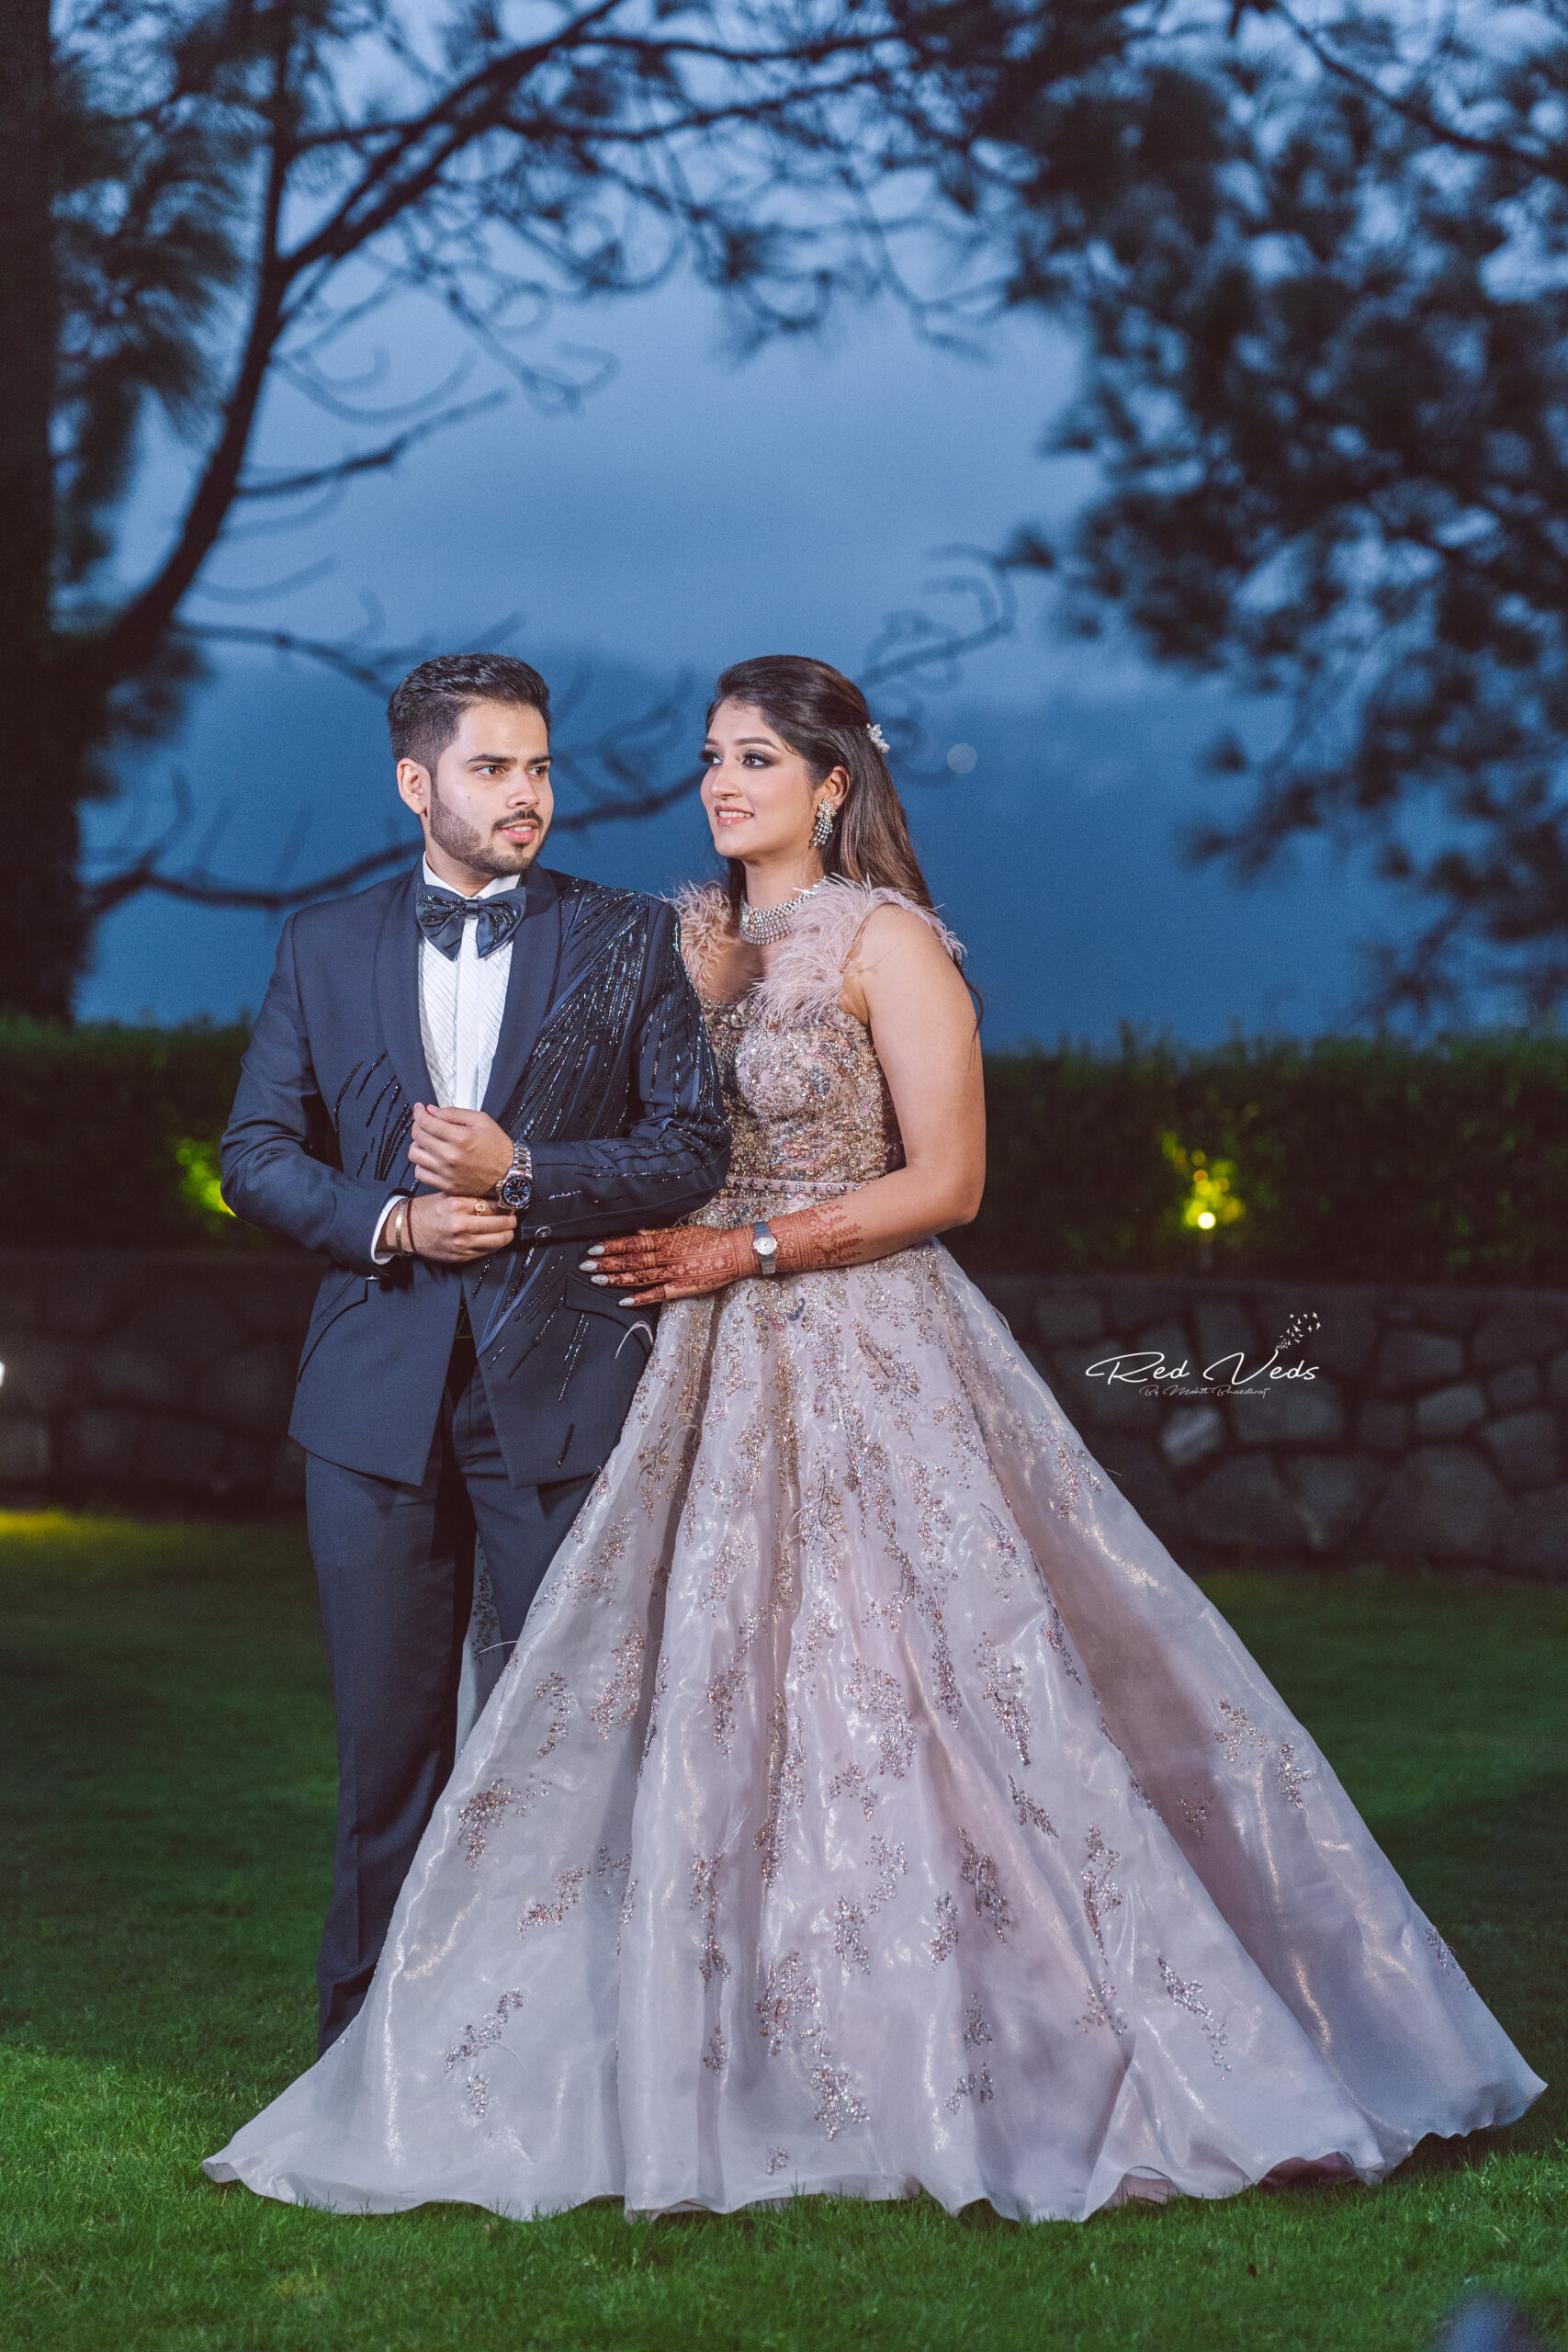 Wedding photography Poses India | How to Pose for Wedding Photos Tips